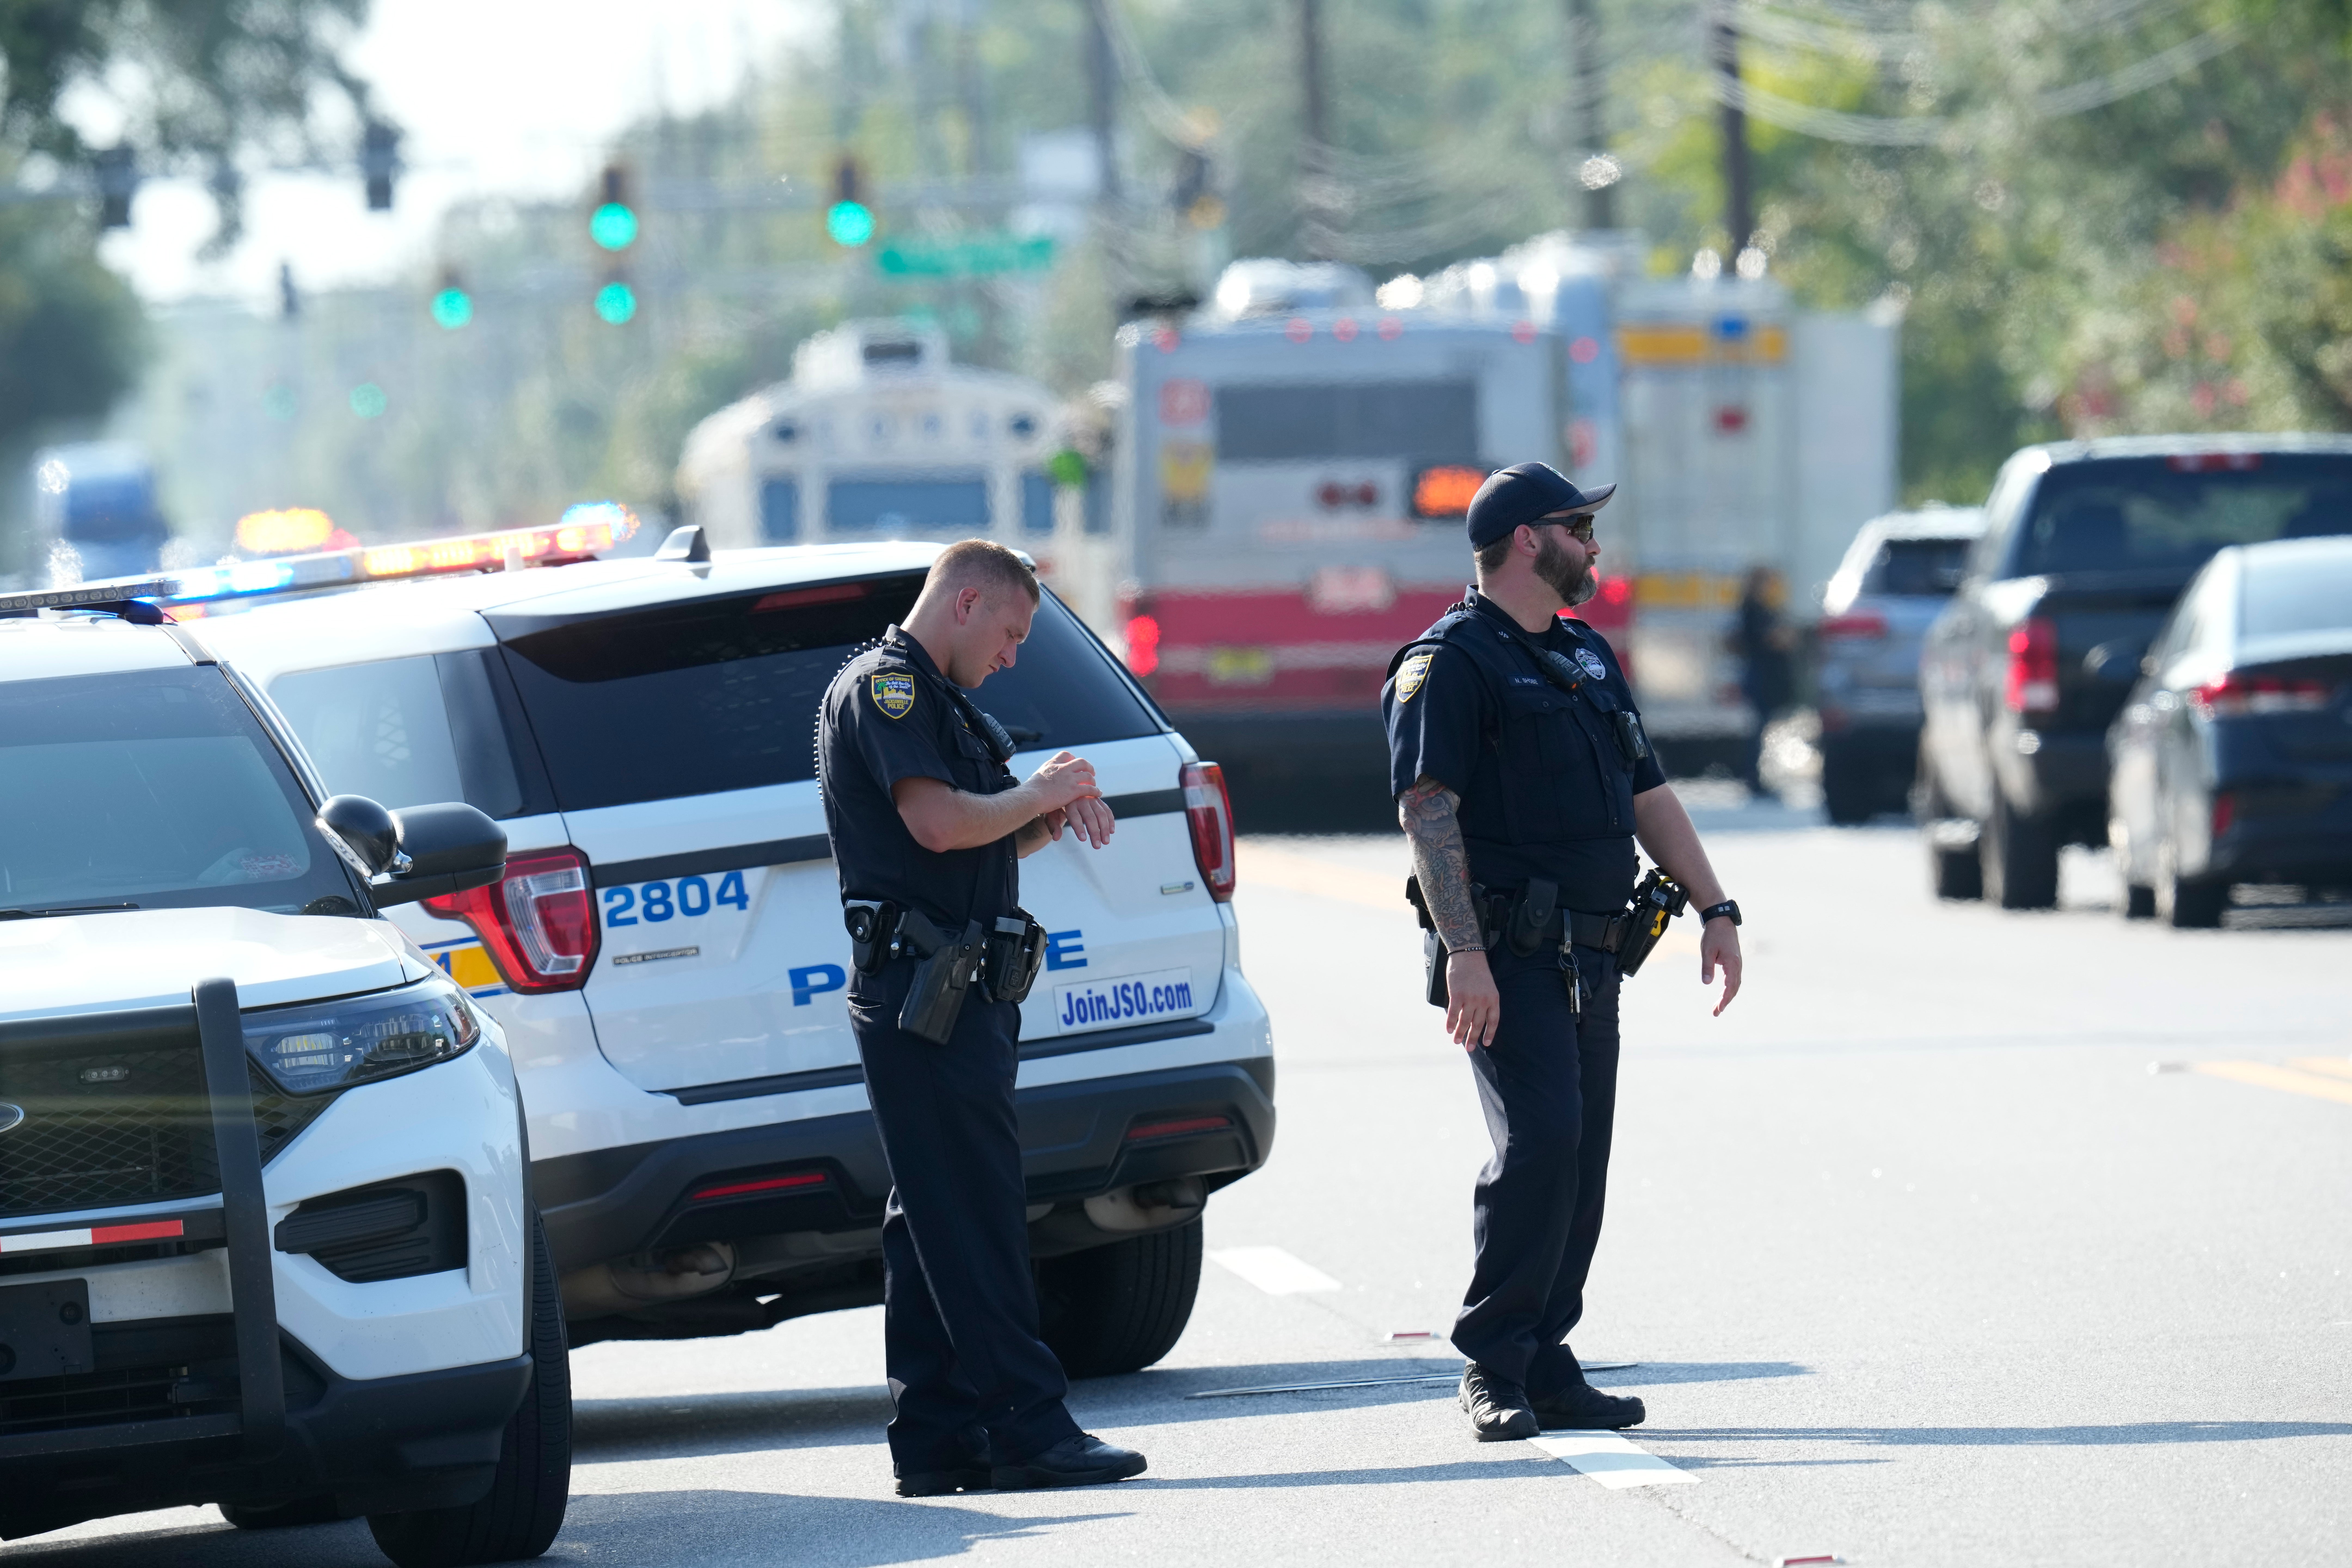 A shooting in Jacksonville, Florida, has left multiple people and the shooter dead, officials say The Independent